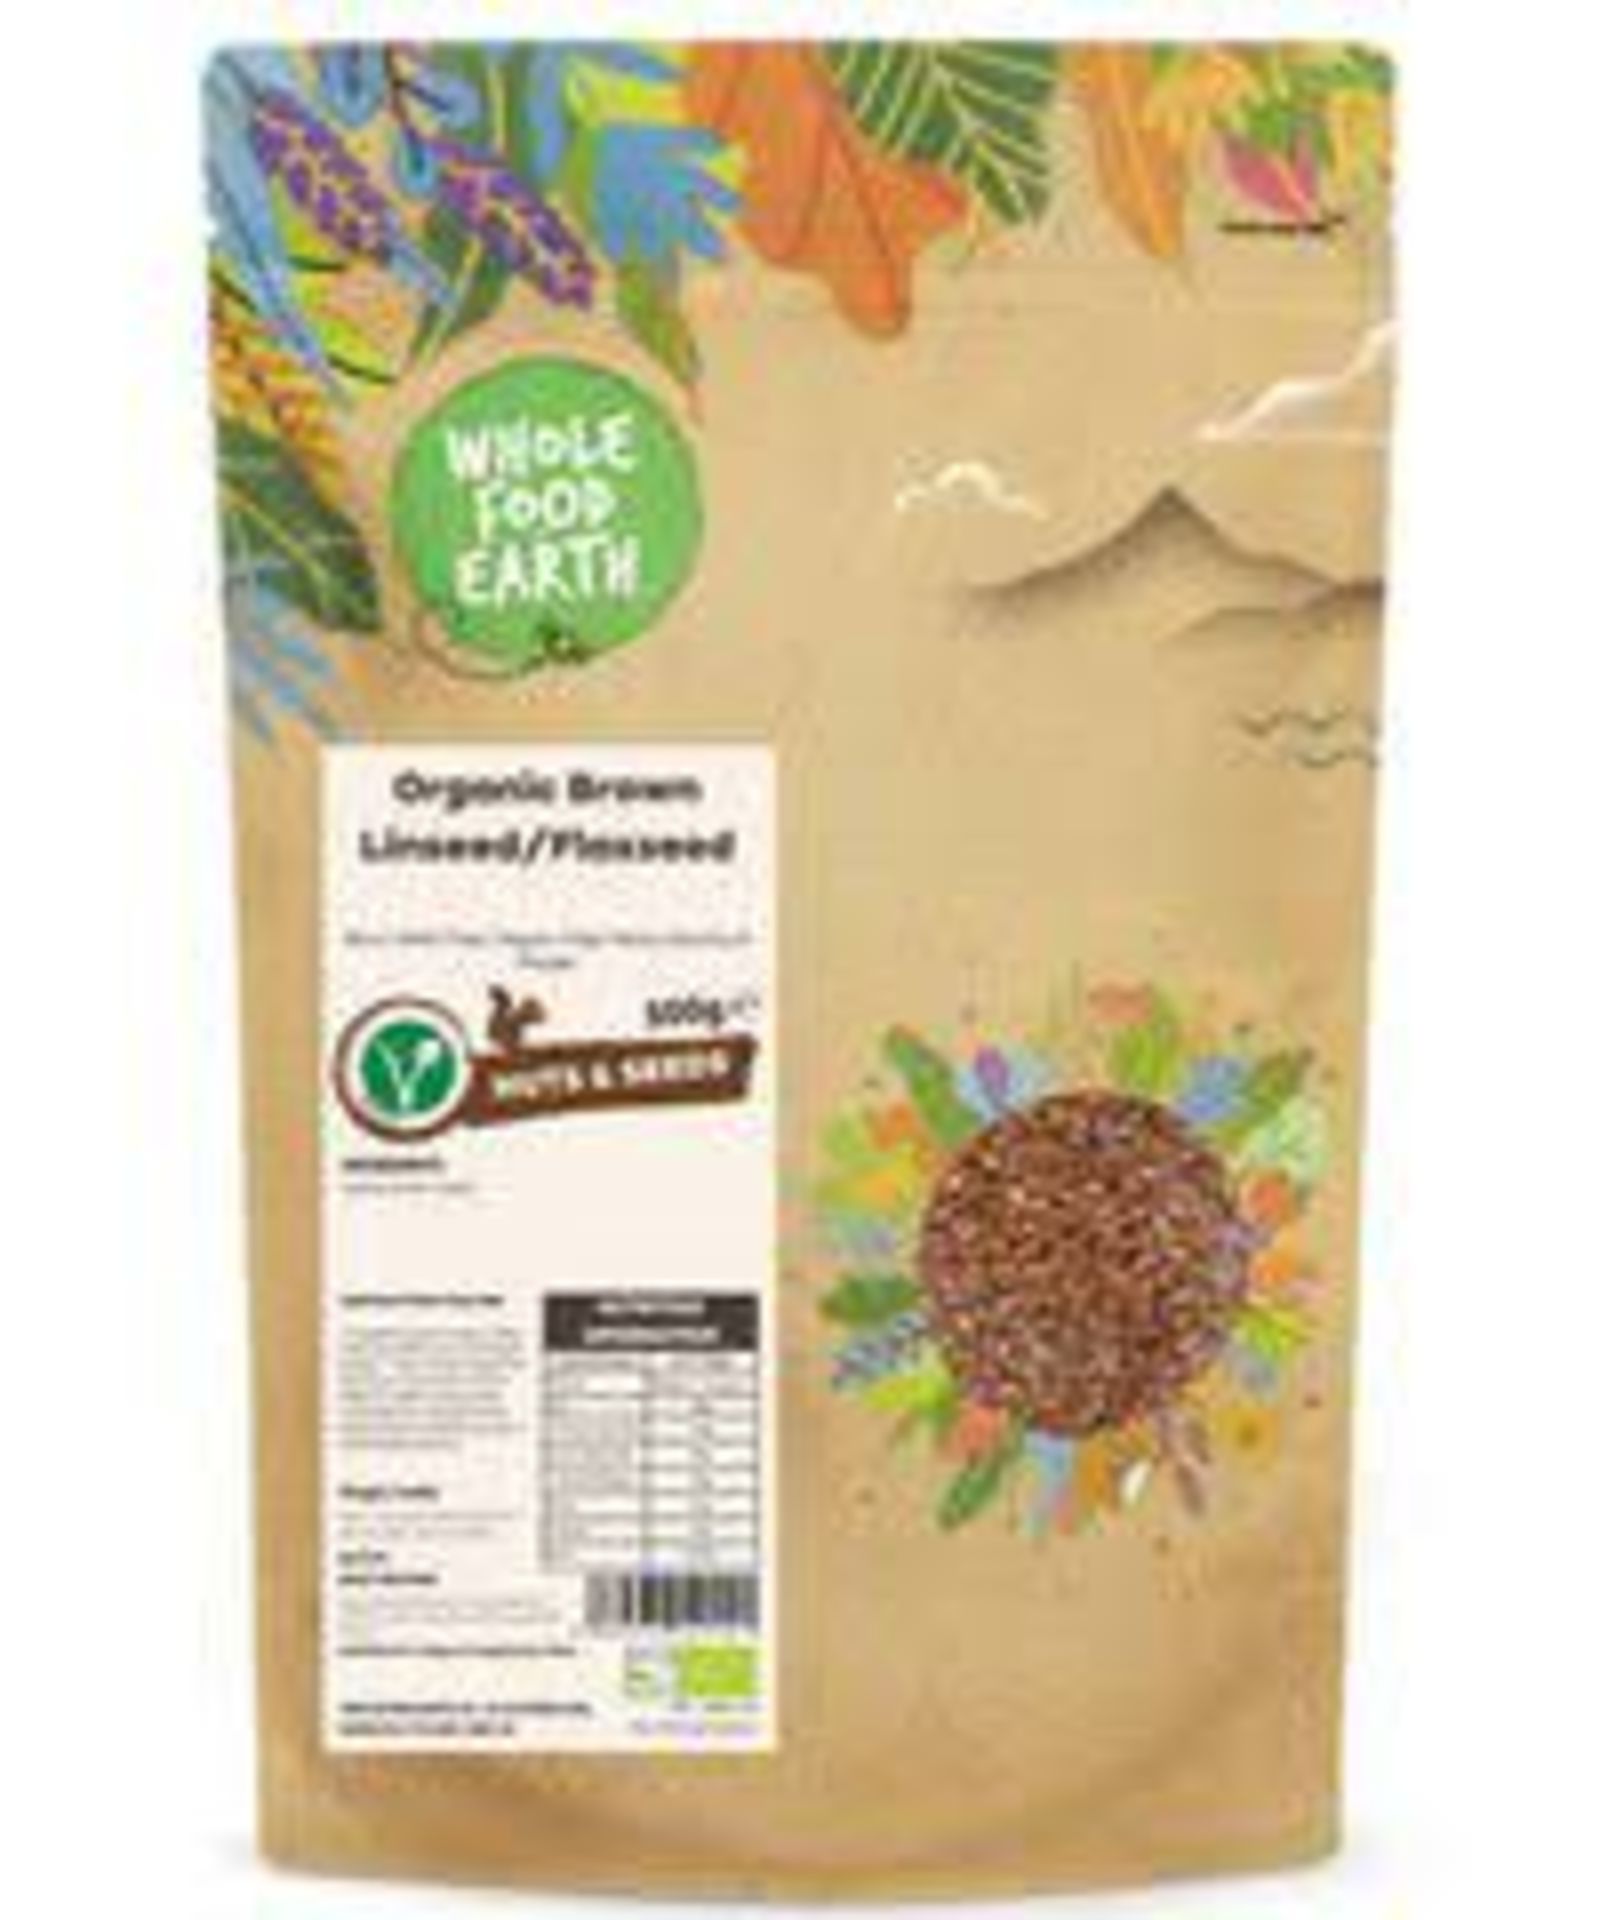 RRP £1500 (Approx. Count 196) spW23Z3729B "Wholefood Earth Brown Linseed/Flaxseed 500g | GMO